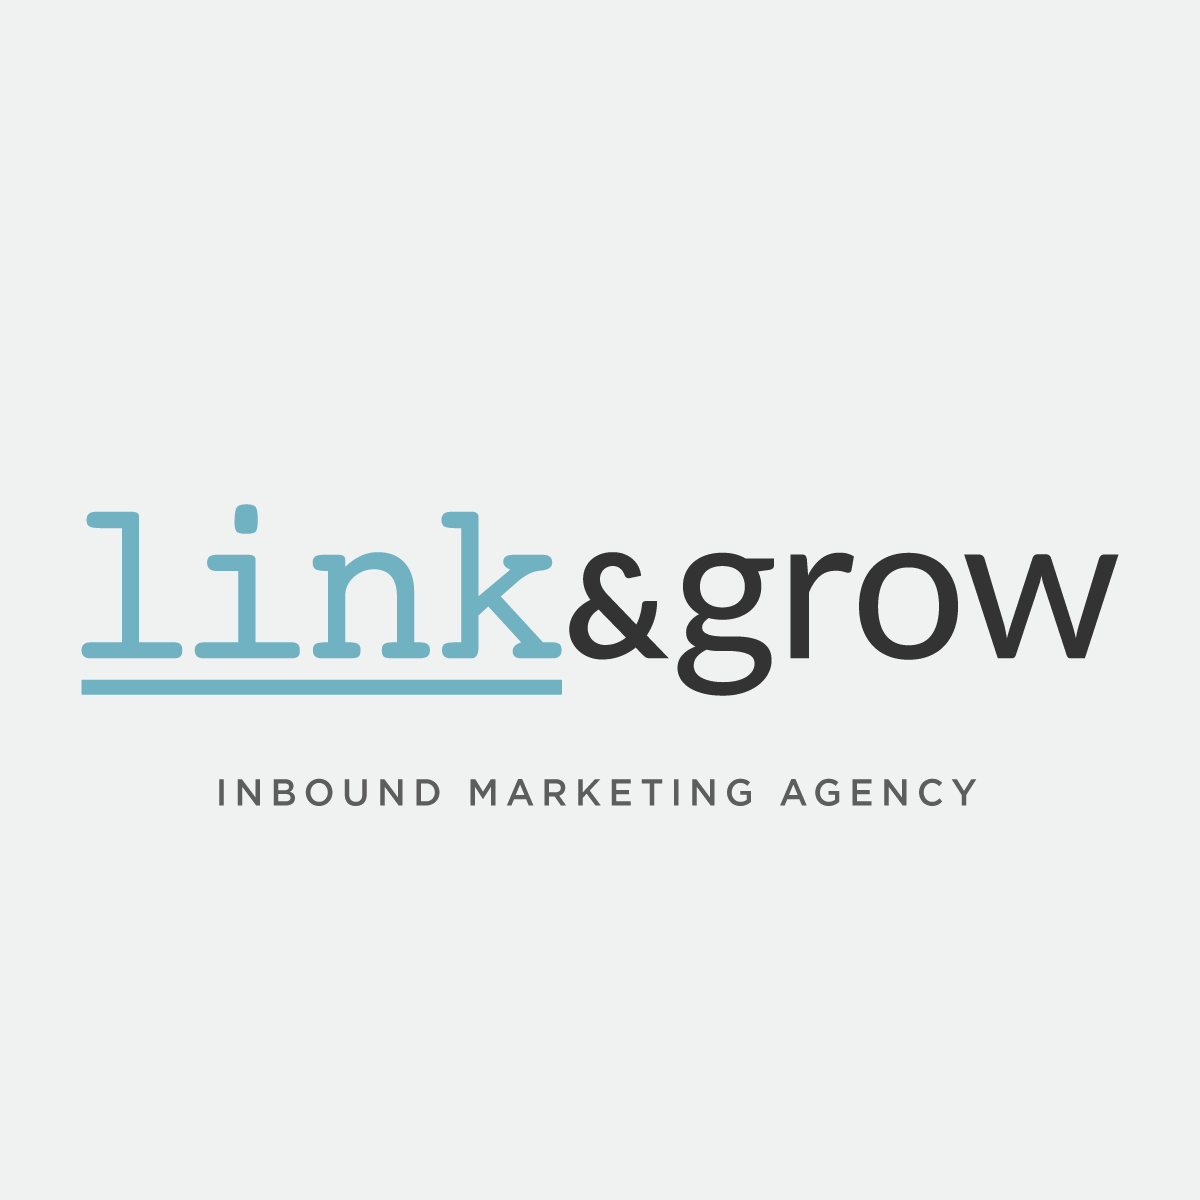 Link&Grow - Inbound Marketing Agency profile on Qualified.One